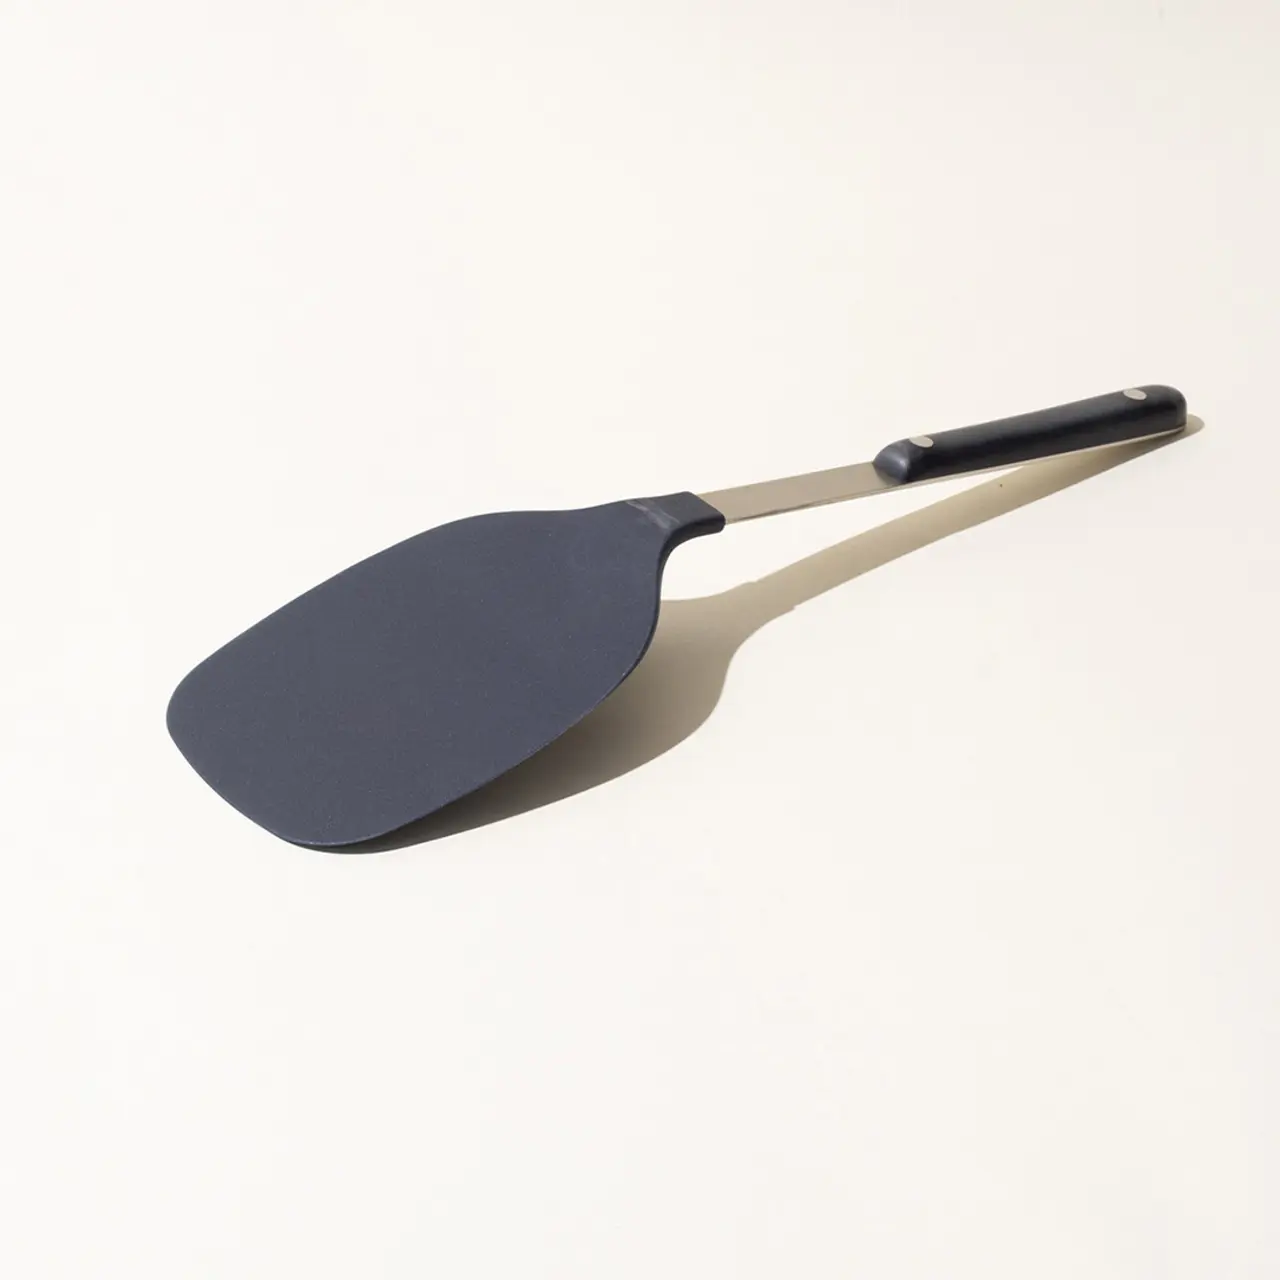 A black silicone spatula with a long handle is lying on a neutral surface at a slight angle to the viewer.